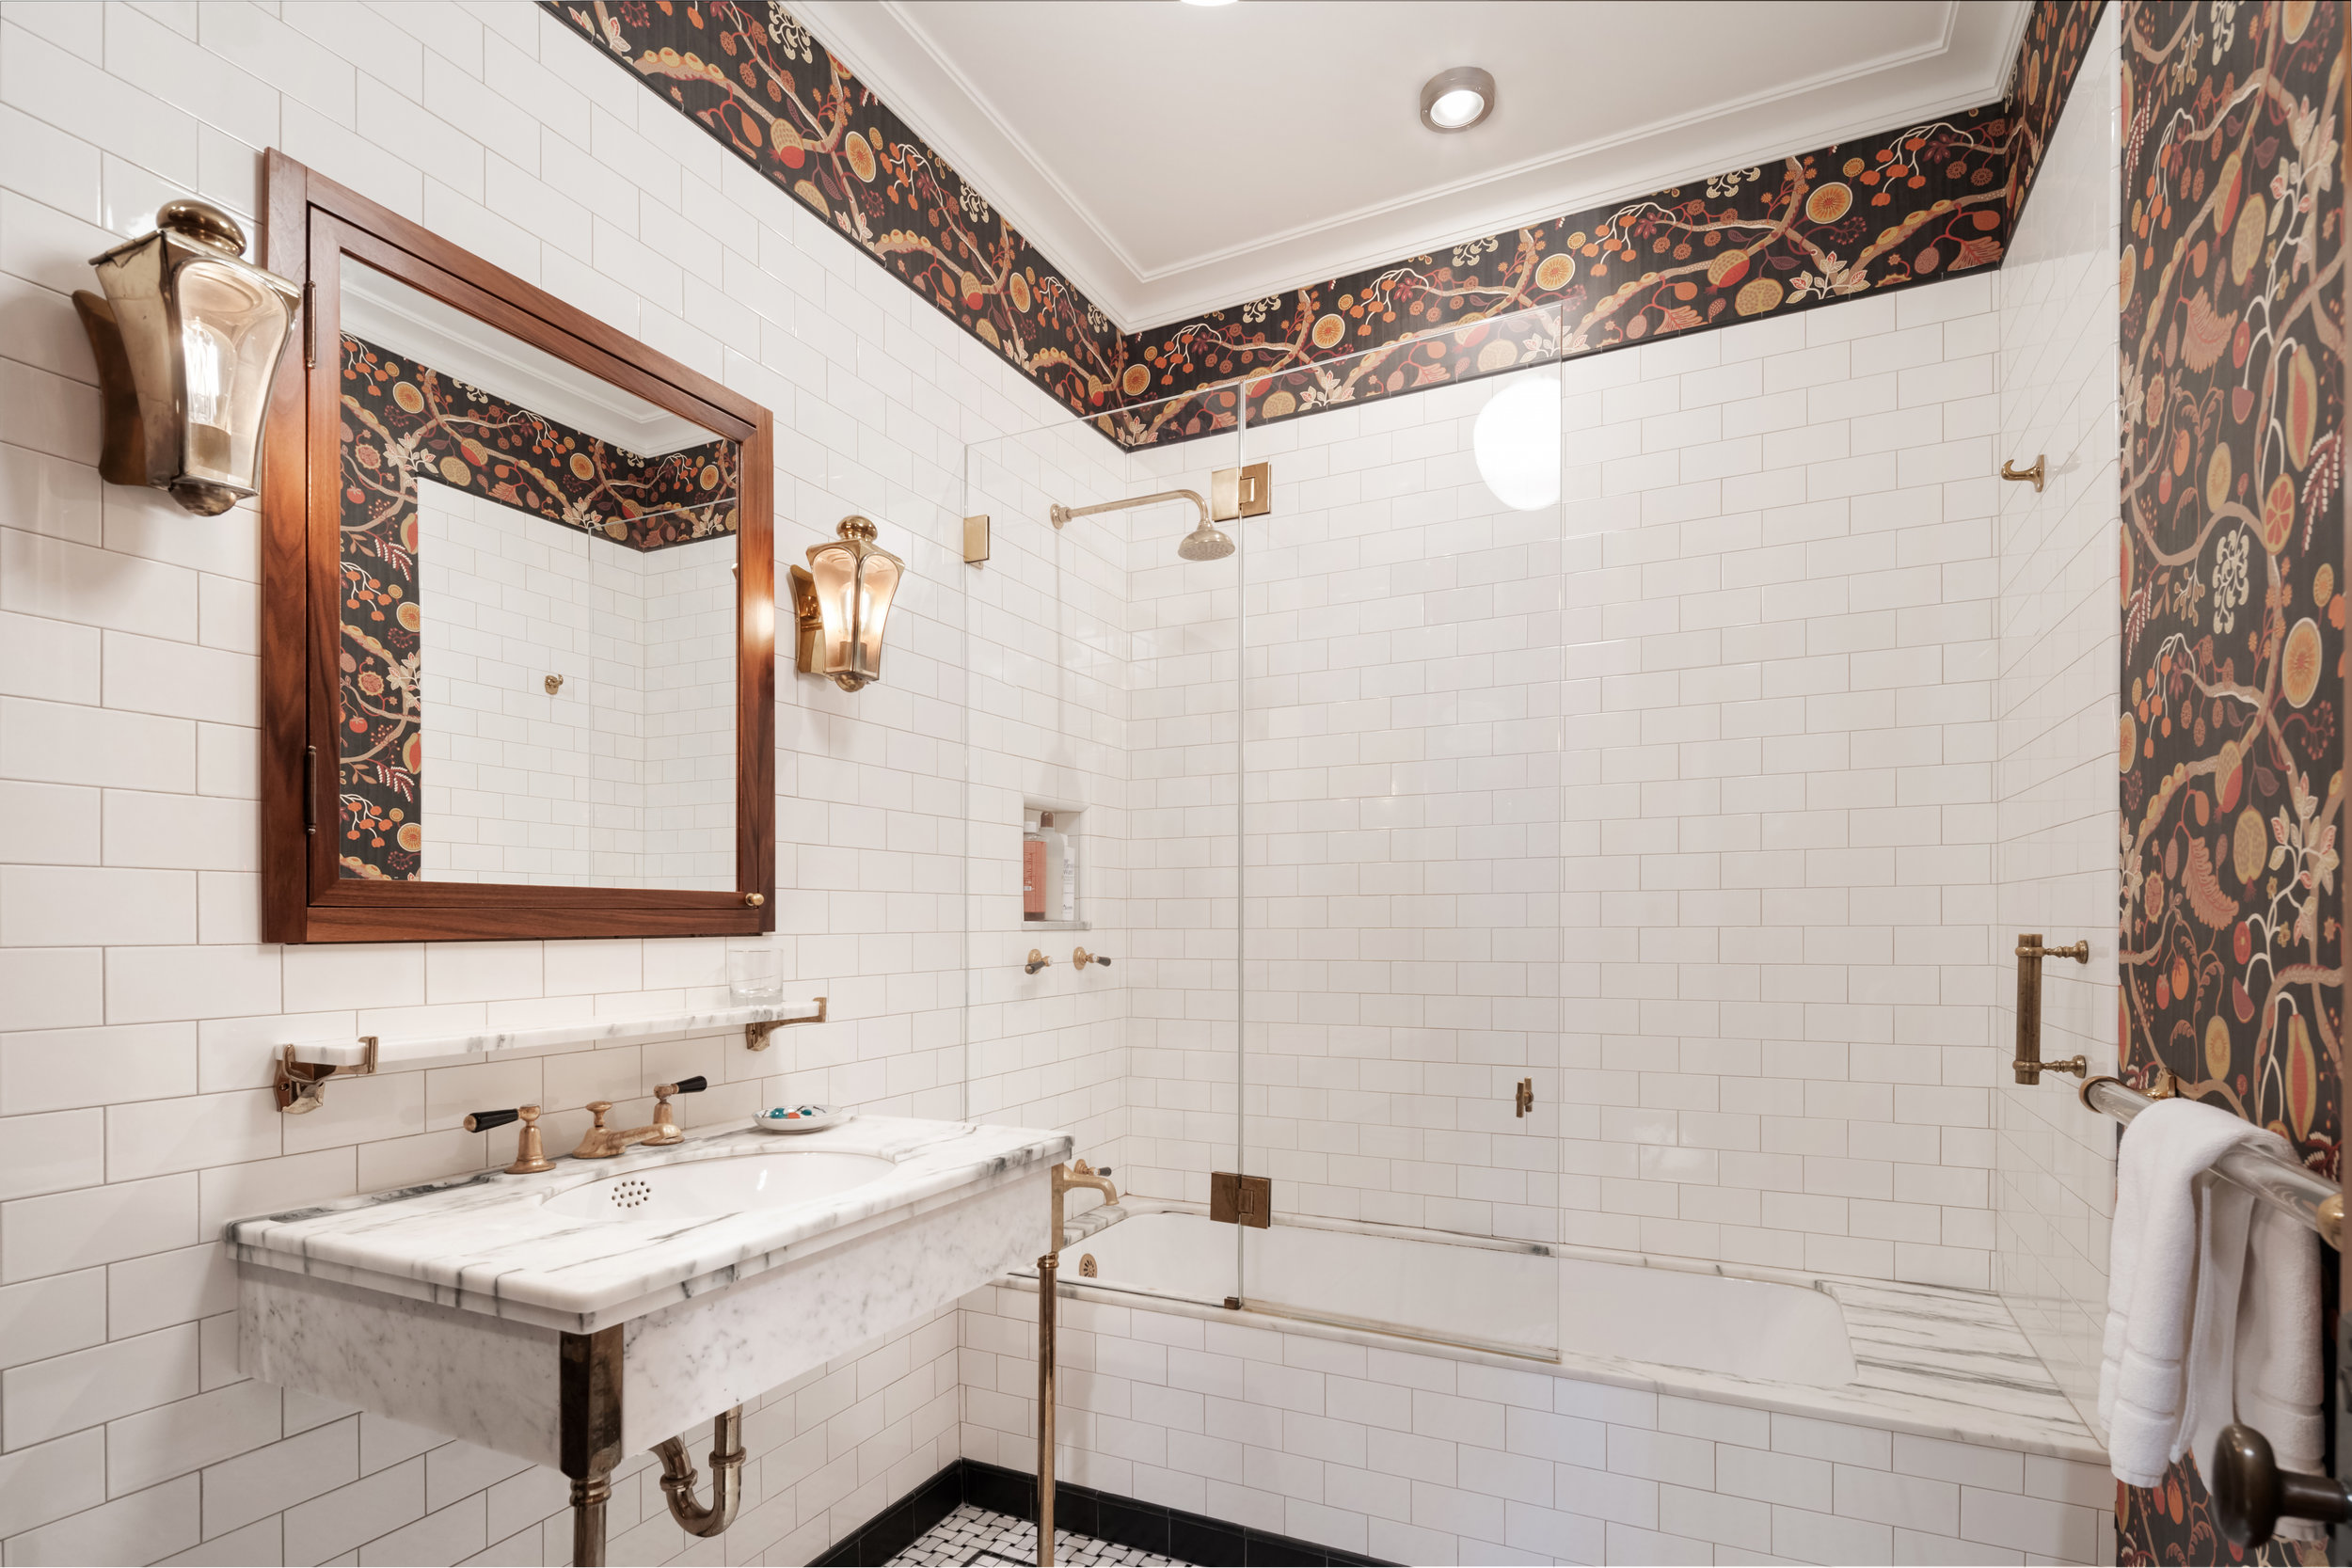 142West26thStreet9-ChelseaNewYork_Holly_Parker_DouglasElliman_Photography_79380264_high_res.jpg